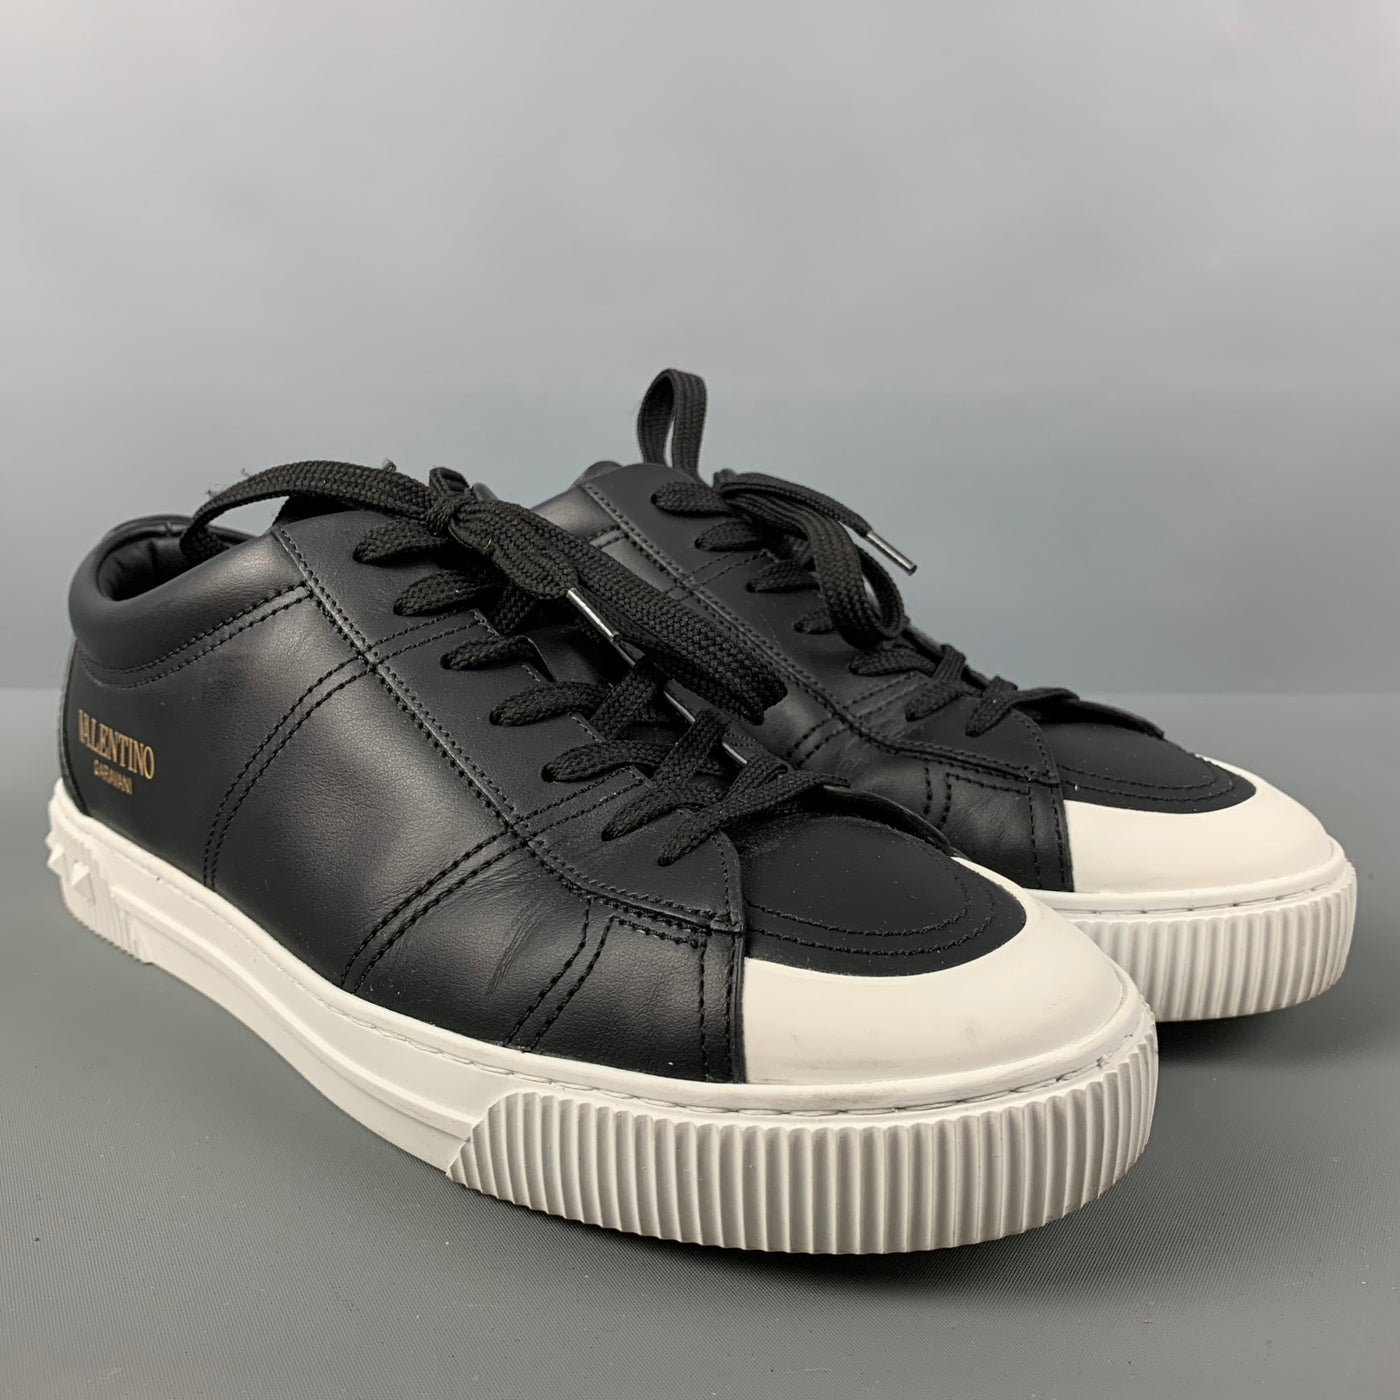 VALENTINO 'City Planet Rockstud' Size 8 Black Studded Leather Top Sneakers – Sui Designer Consignment